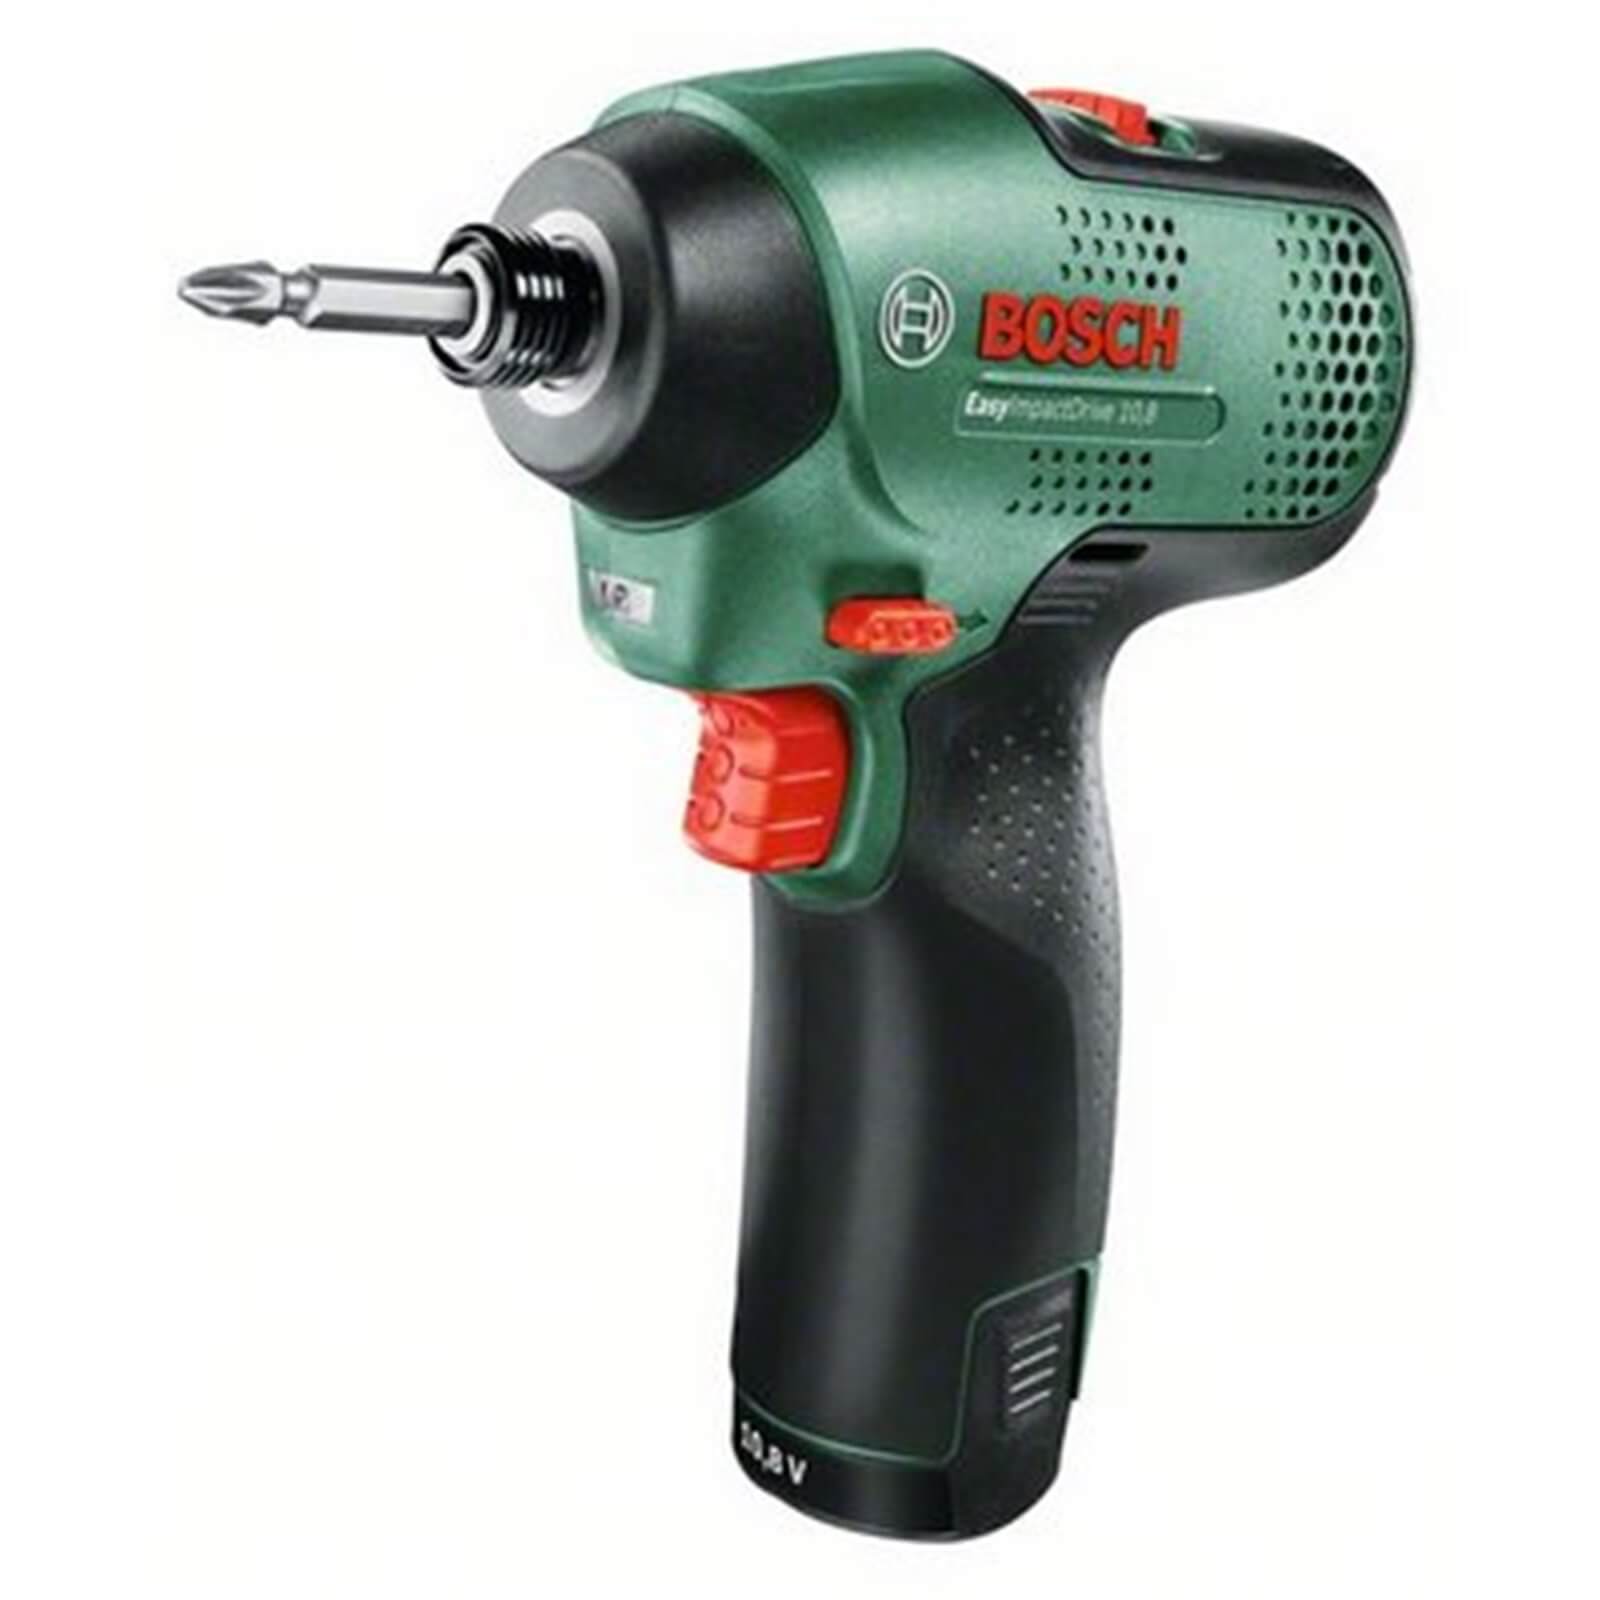 Bosch EasyImpact Driver 12 Cordless Impact Drill Tool (no battery included)